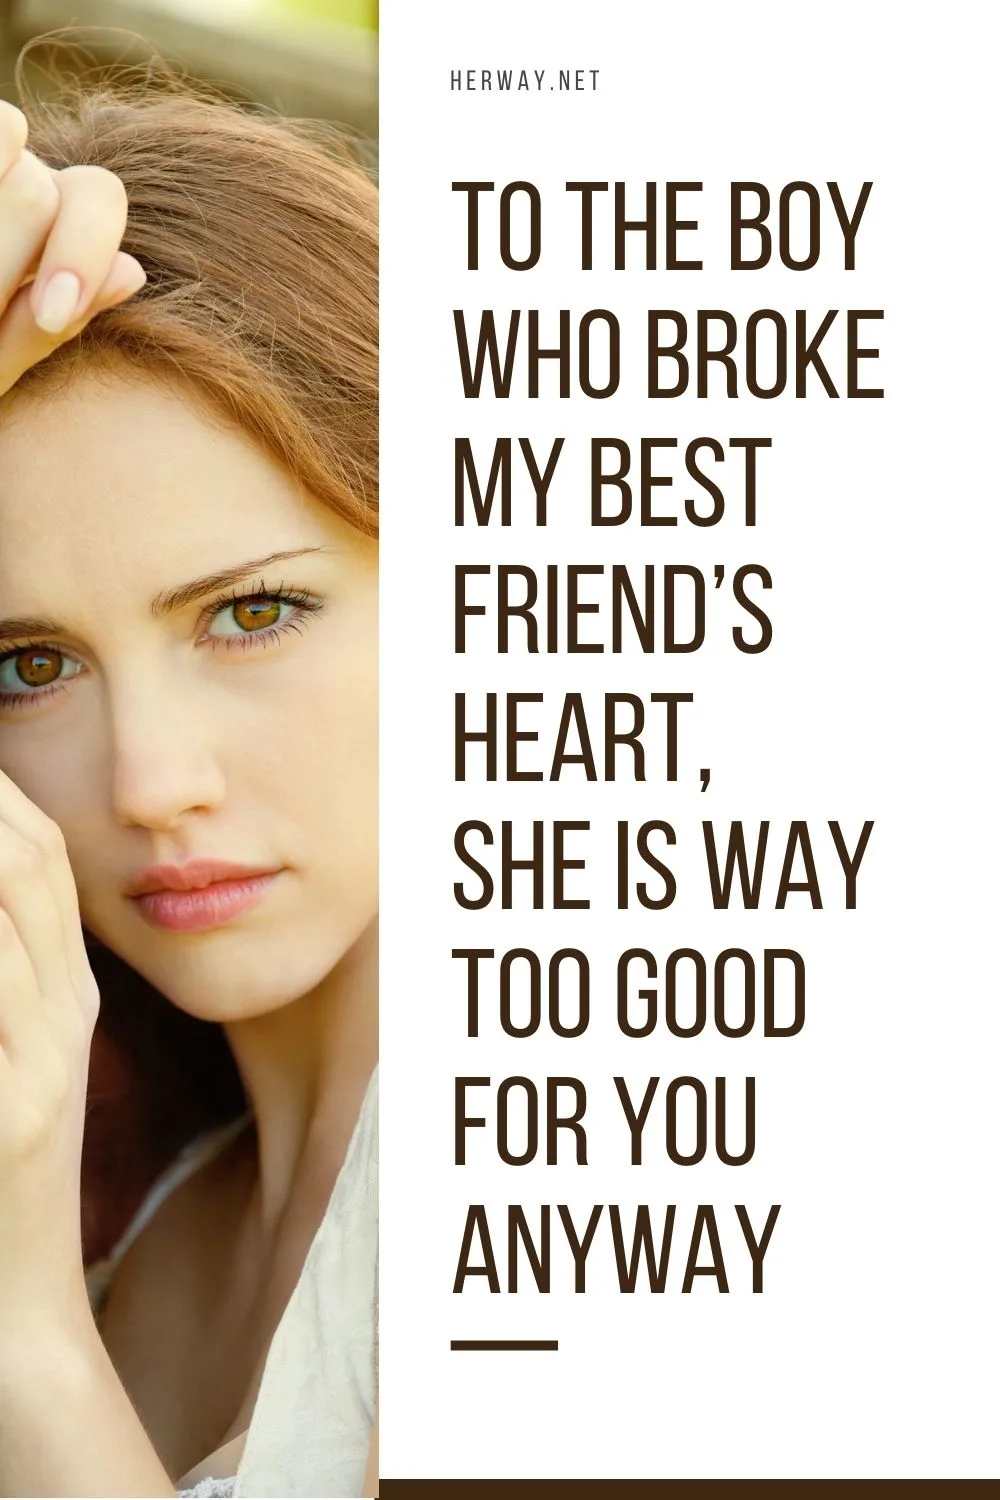 To The Boy Who Broke My Best Friend’s Heart, She is Way Too Good For You Anyway